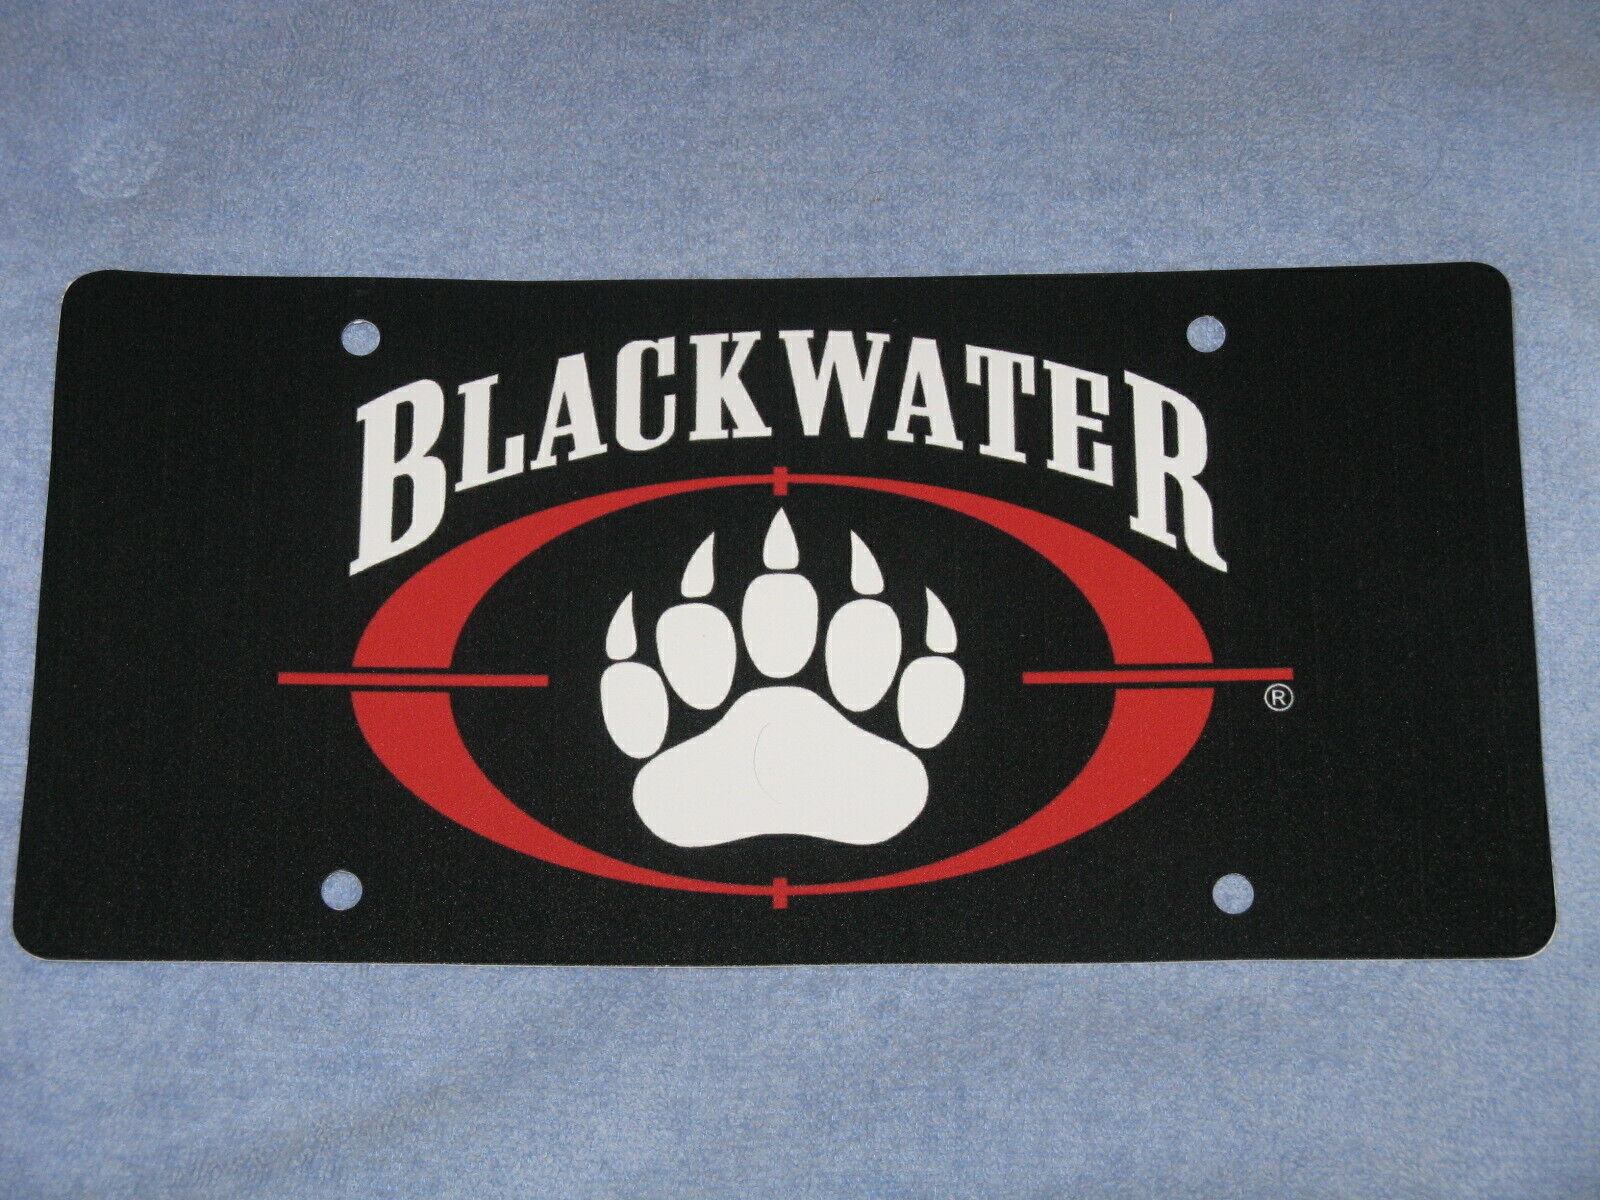 BLACKWATER USA SECURITY PAW LOGO License Plate Private Military Tactical 